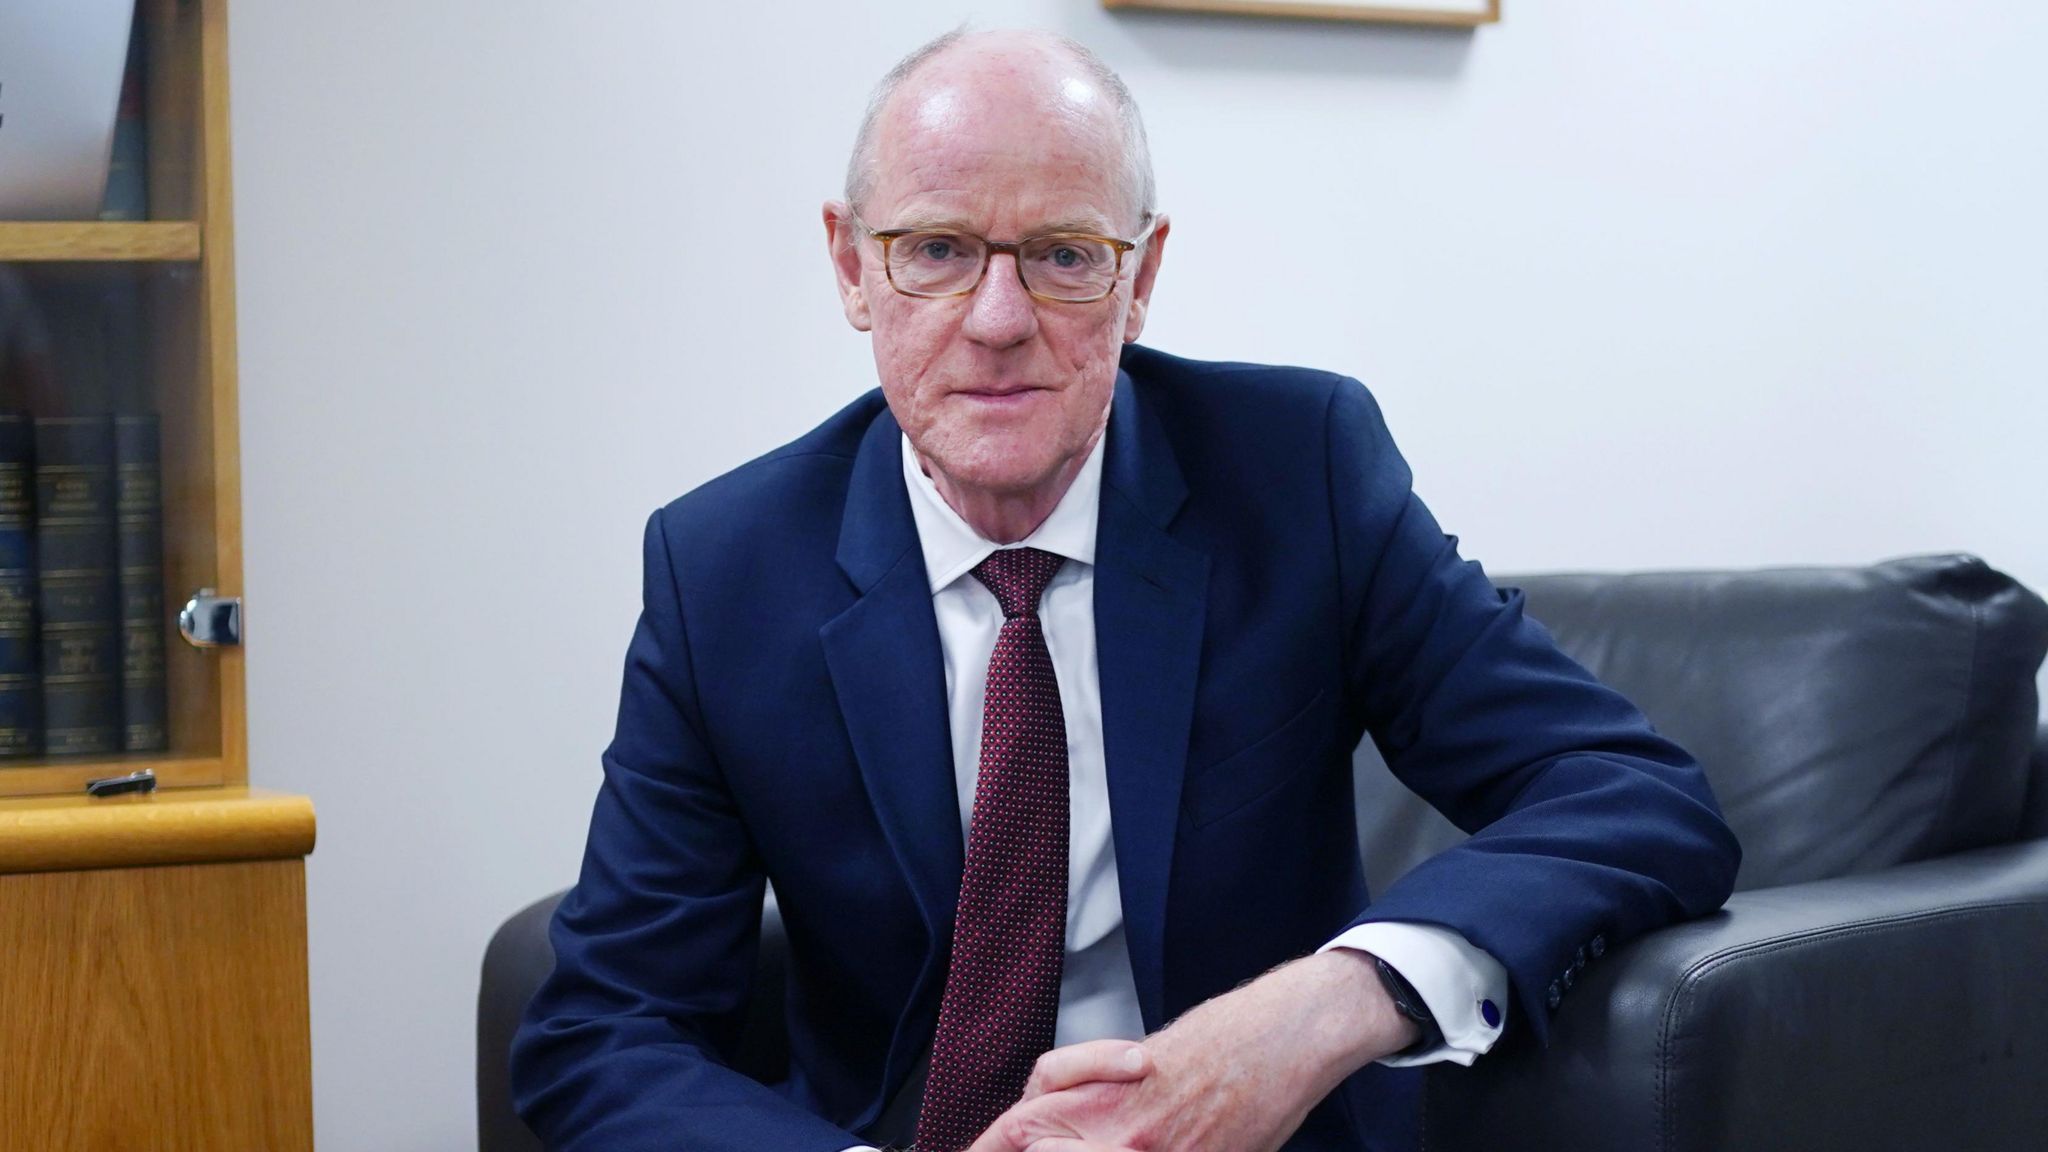 Nick Gibb sitting in a leather chair wearing glasses and a suit